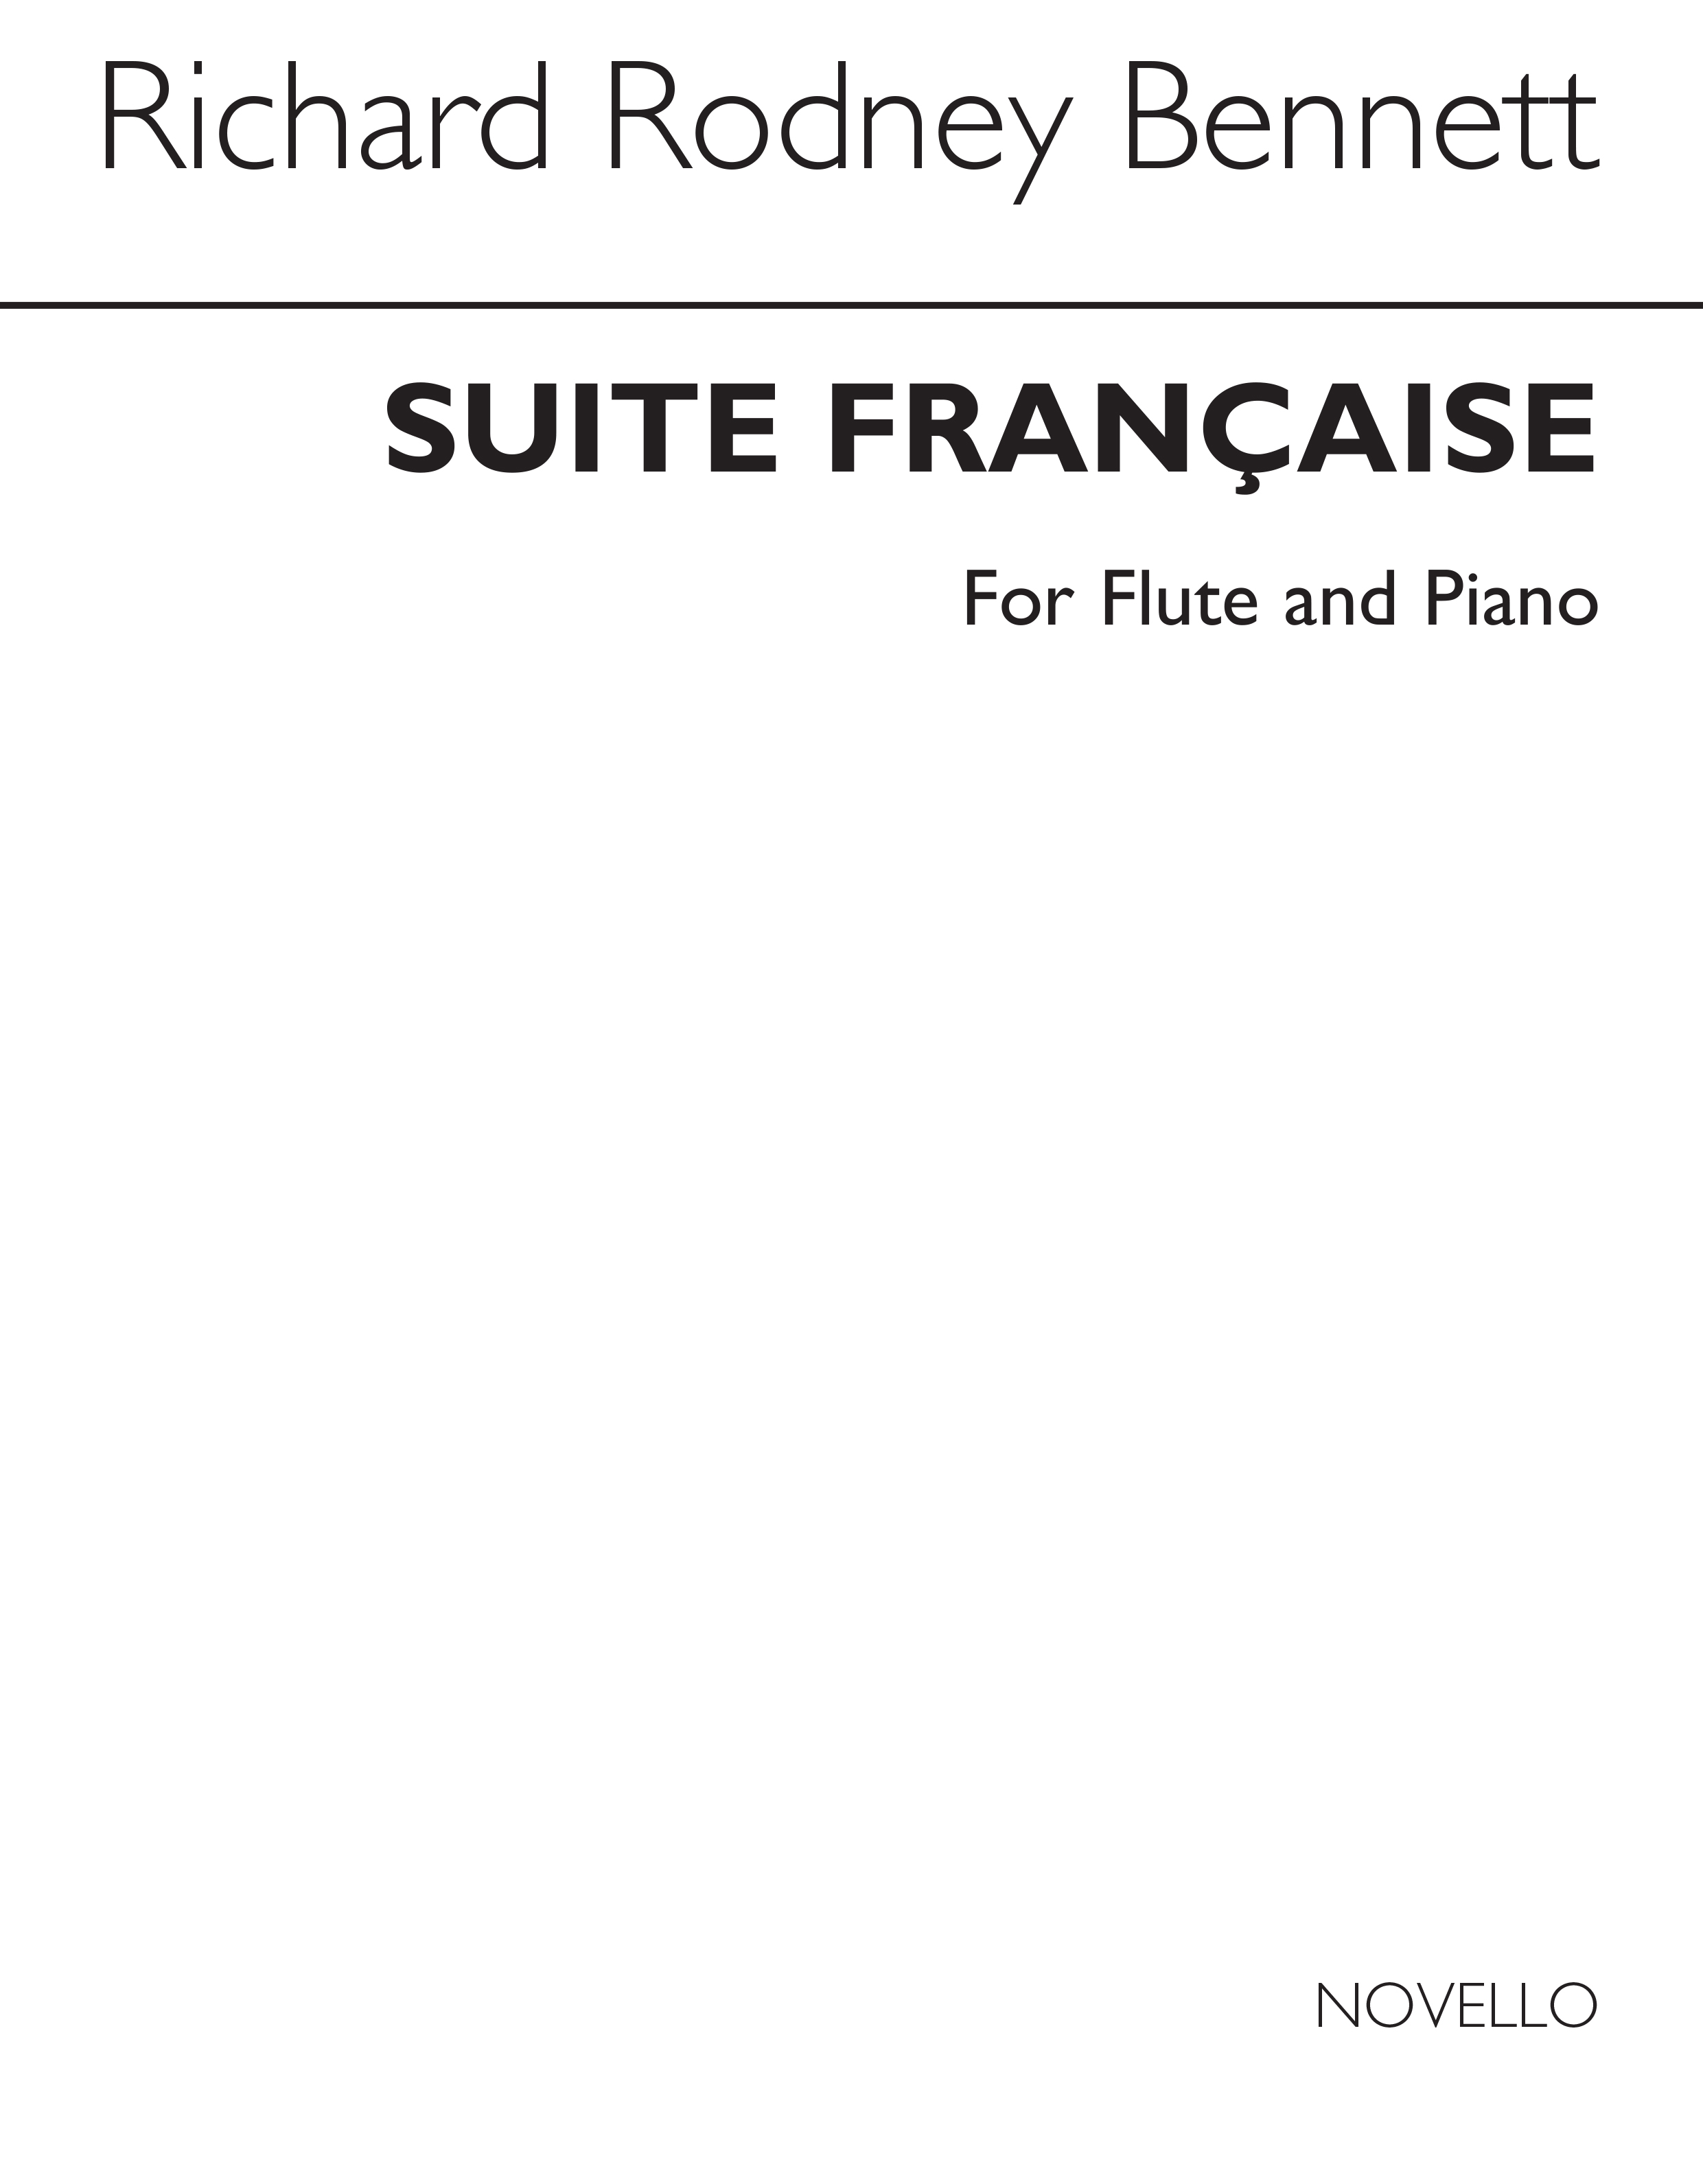 Richard Rodney Bennett: Suite Francaise For Flute And Piano